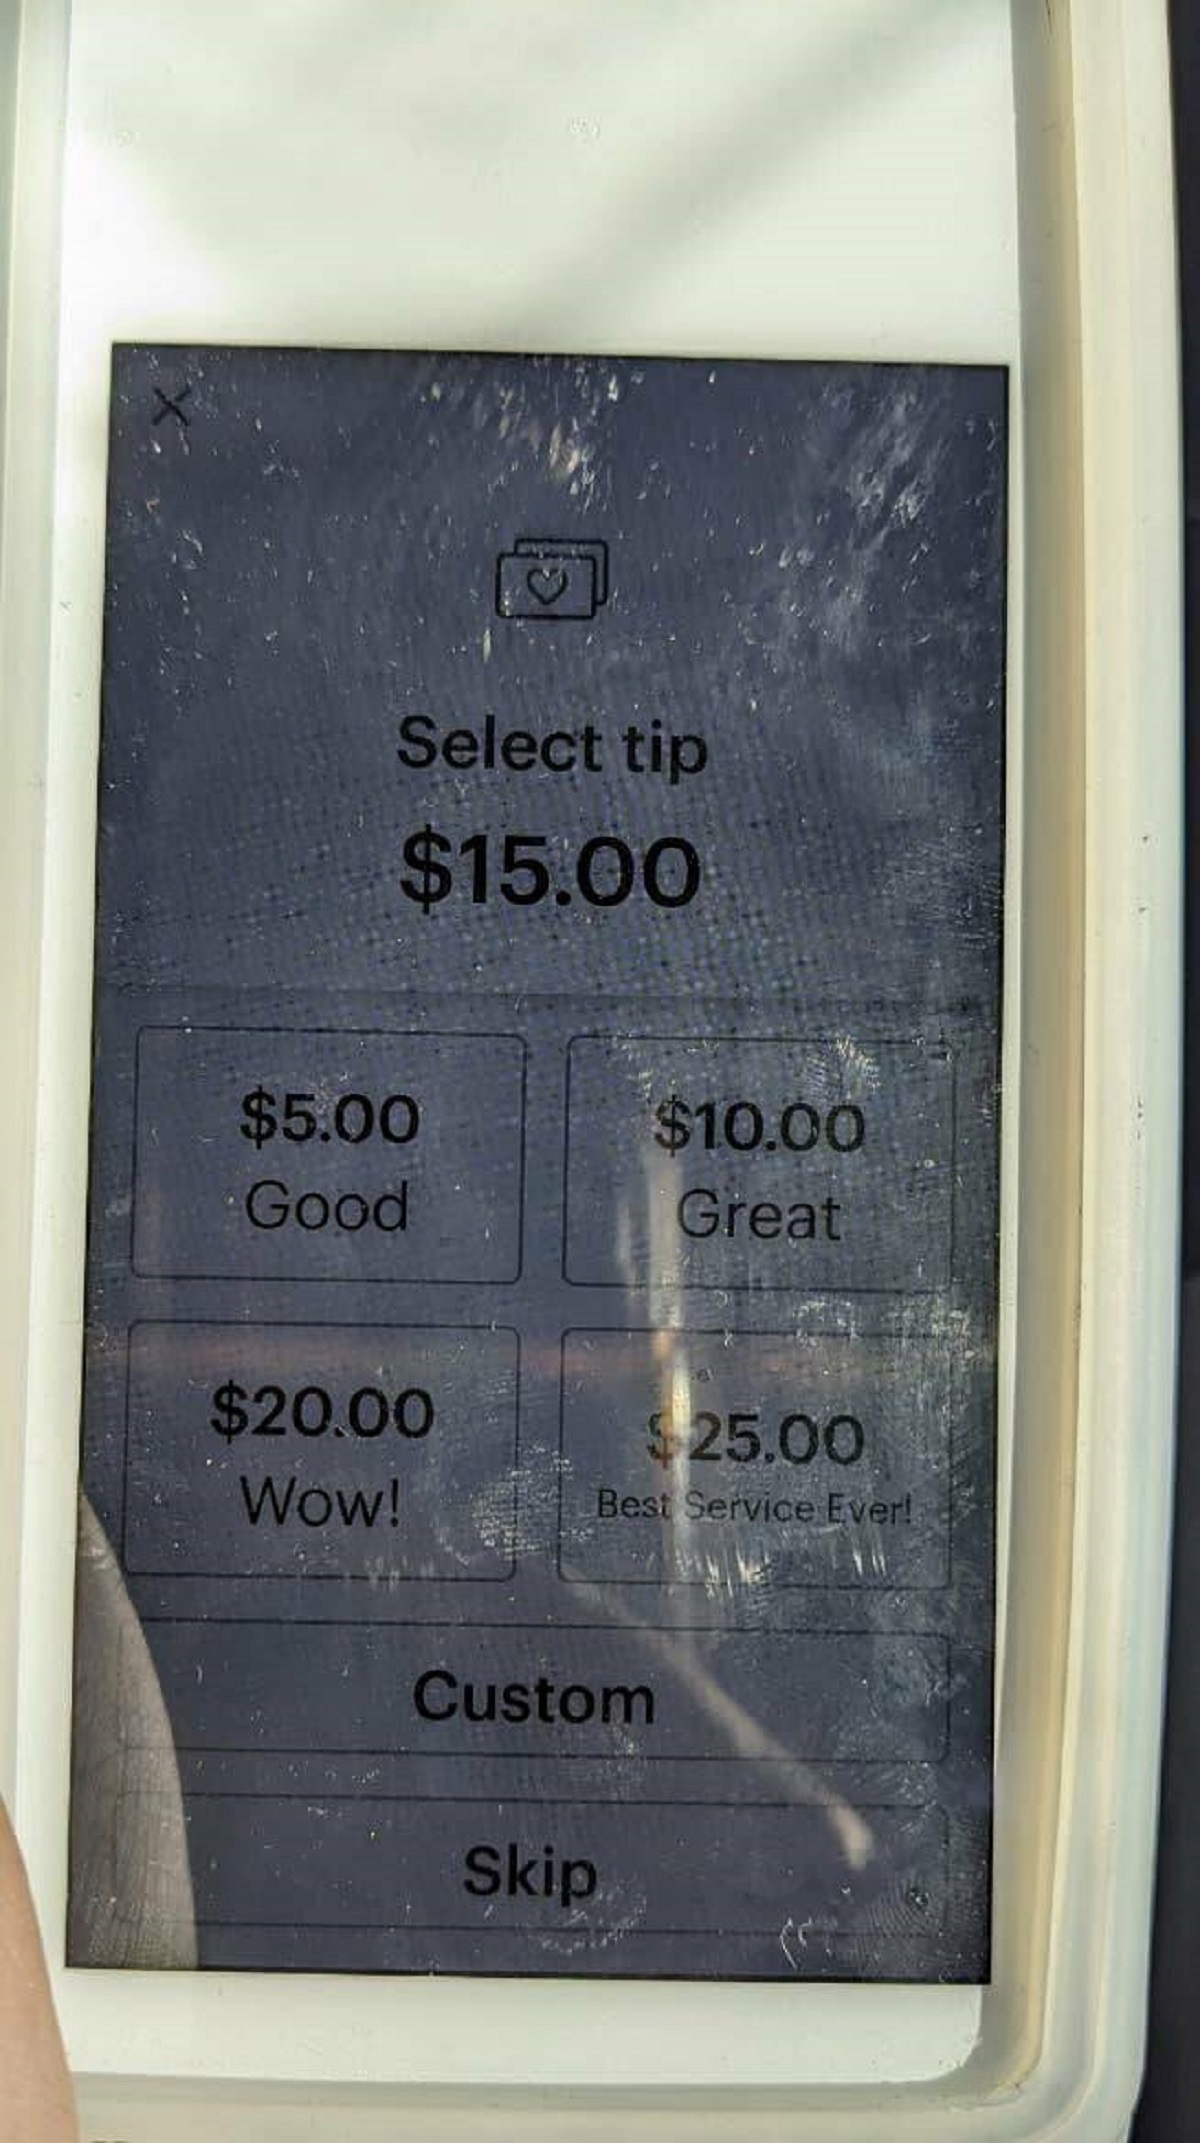 This customer received these tip suggestions after a $15 taxi ride: